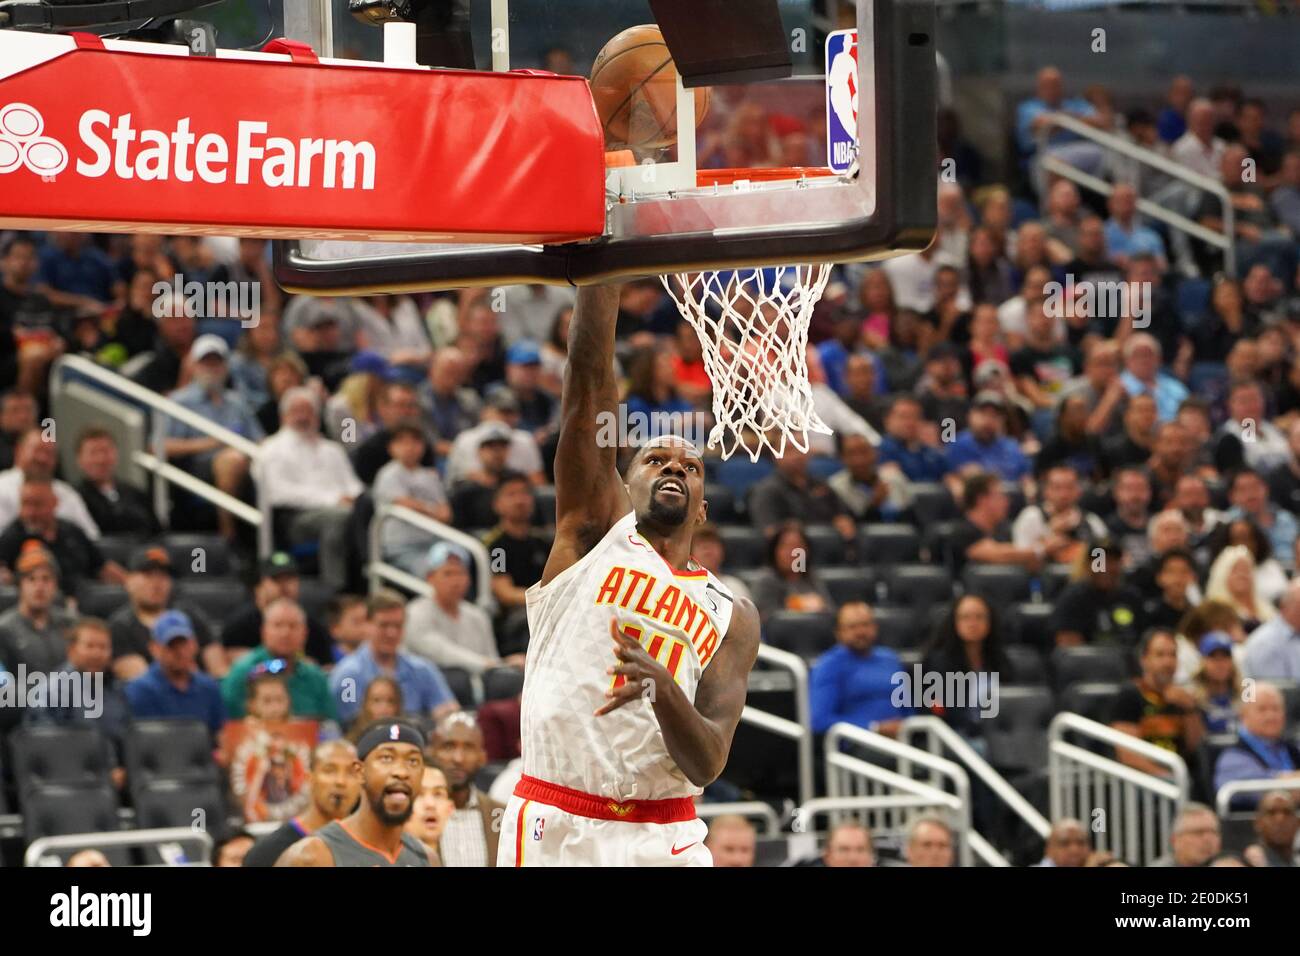 Atlanta Hawks player Dewayne Dedmon #14 makes a layup during the game at the Amway Center in Orlando Florida on Monday February 8, 2020.  Photo Credit:  Marty Jean-Louis Stock Photo